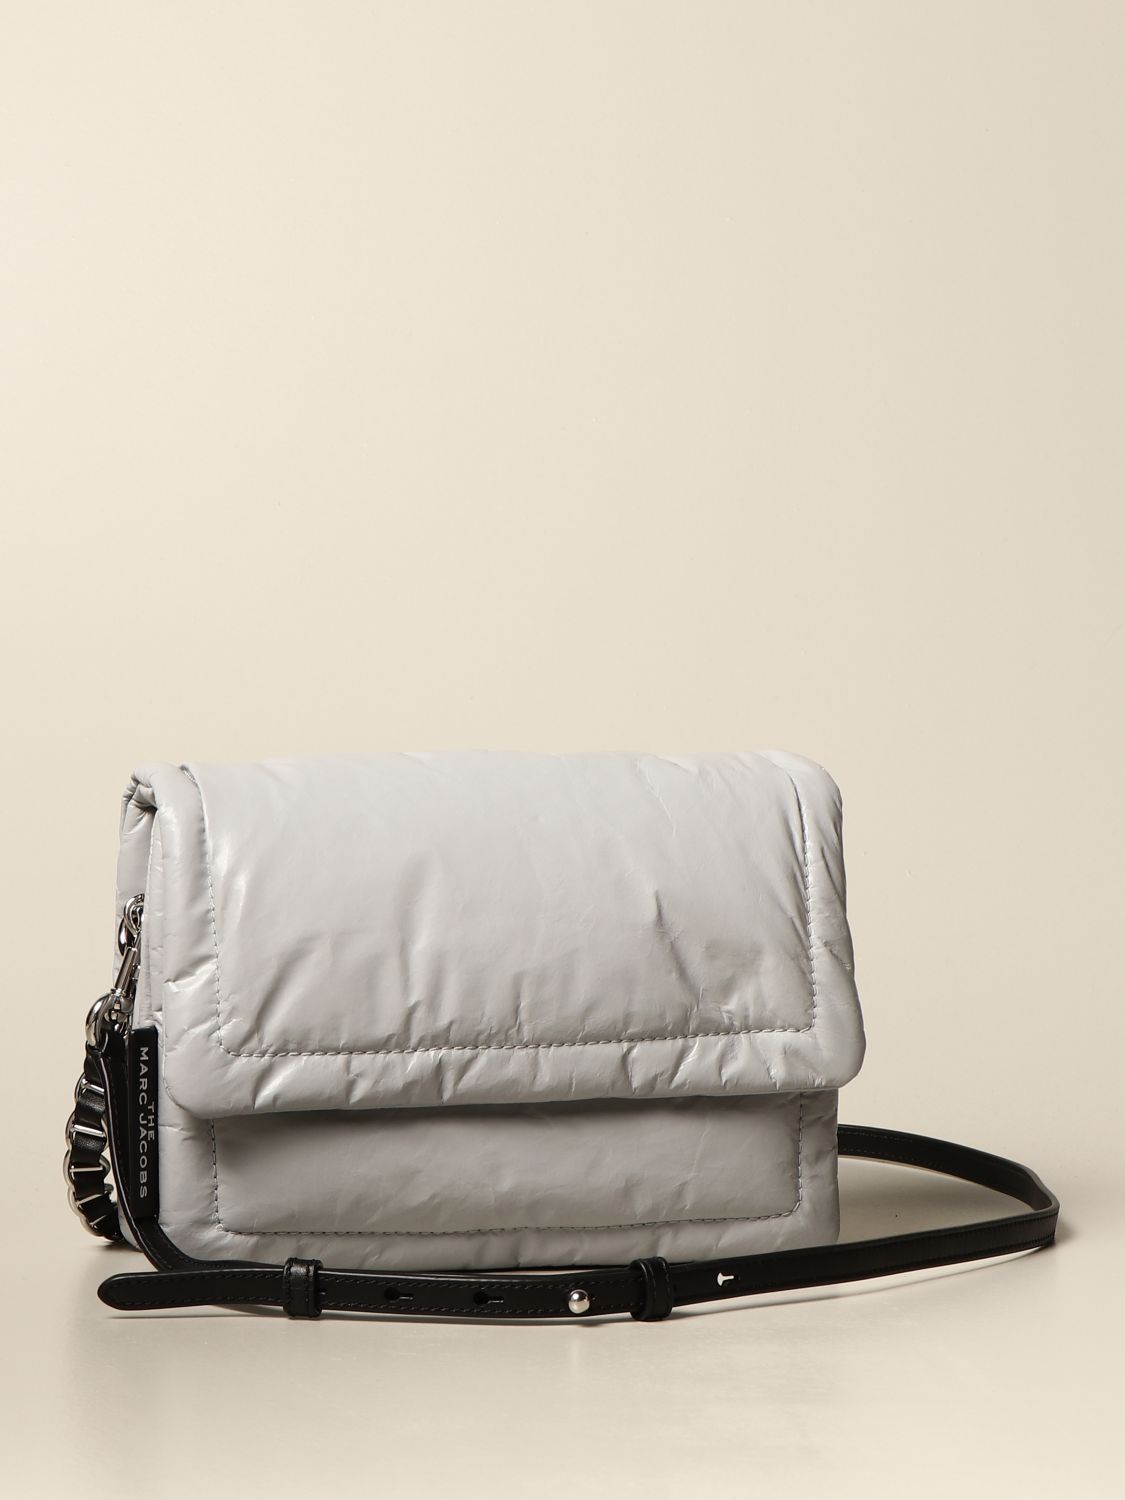 MARC JACOBS: The Pillow bag in ultralight leather - Grey  Marc Jacobs  crossbody bags M0015416 online at